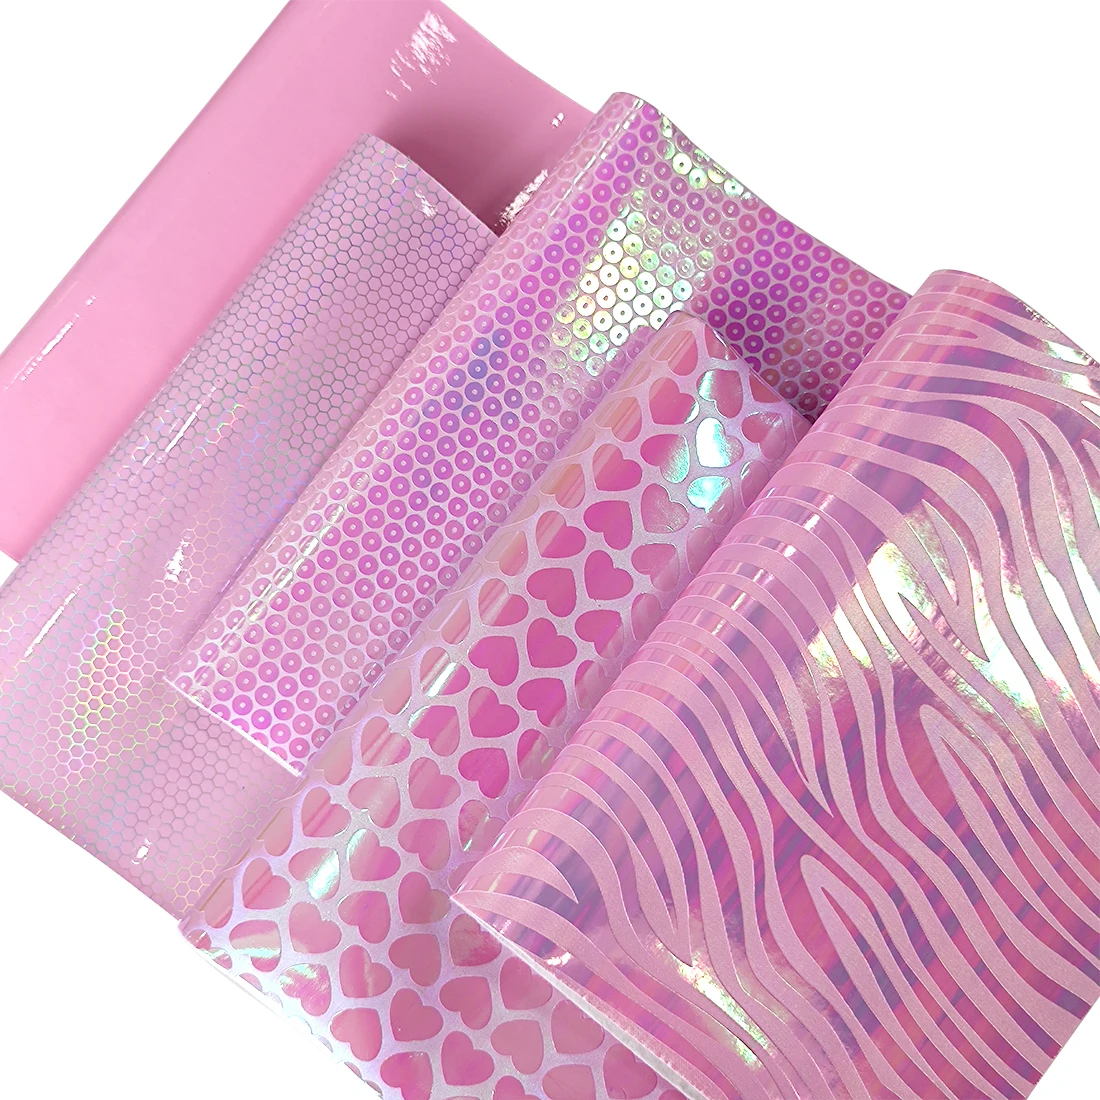 

Pink Set Heart Printed Honeycomb Wave Embossed Faux Leather Fabric Sheets for Bows Crafts Holographic Glossy Bright Leatherette